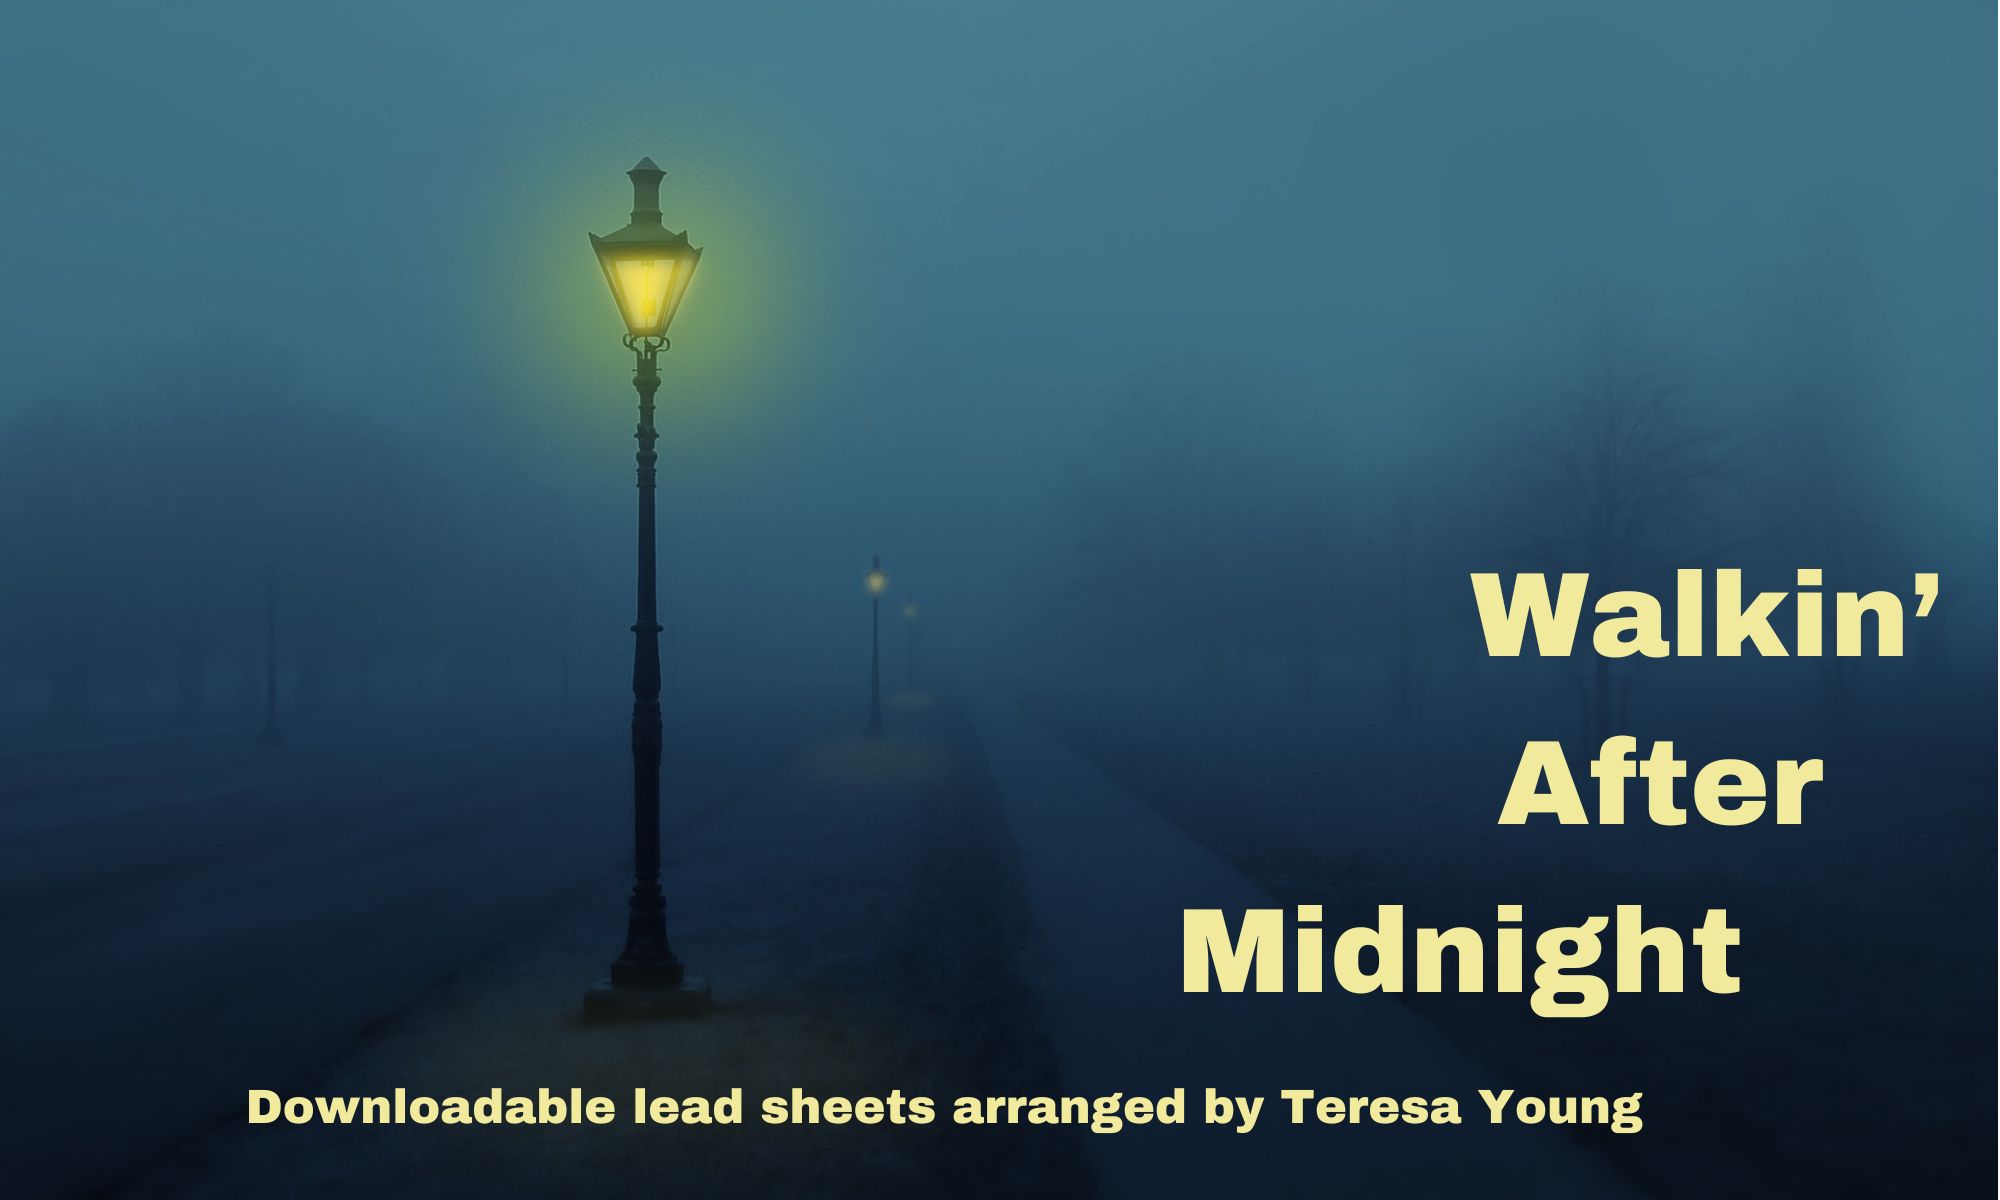 Walkin' After Midnight downloadable lead sheets